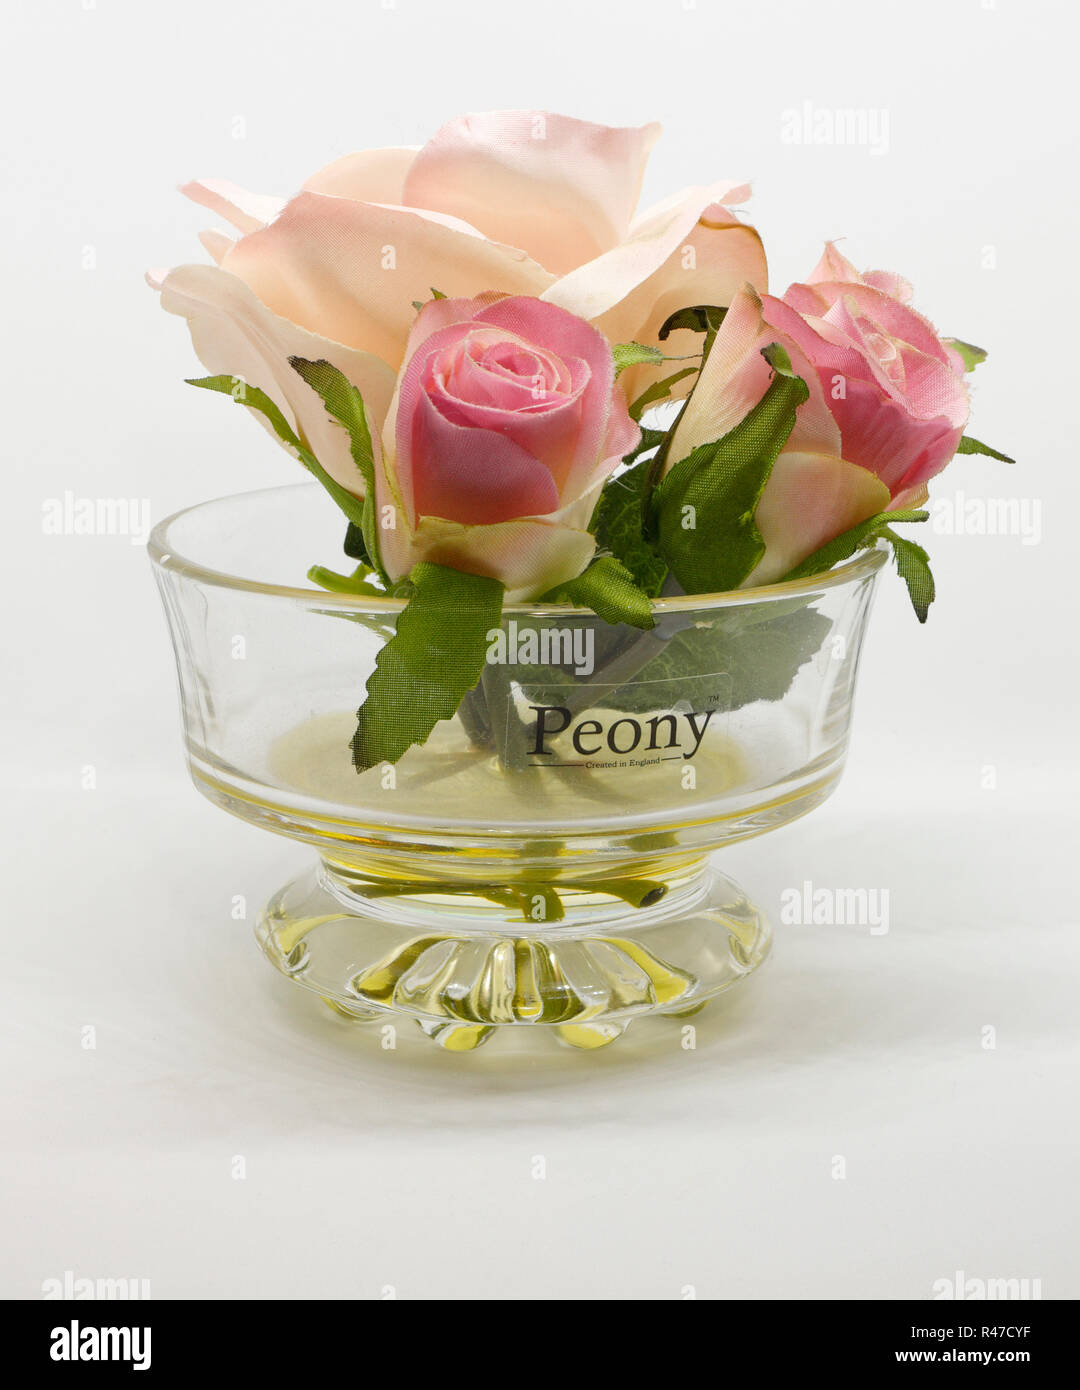 Artificial roses in glass bowl on white background Stock Photo